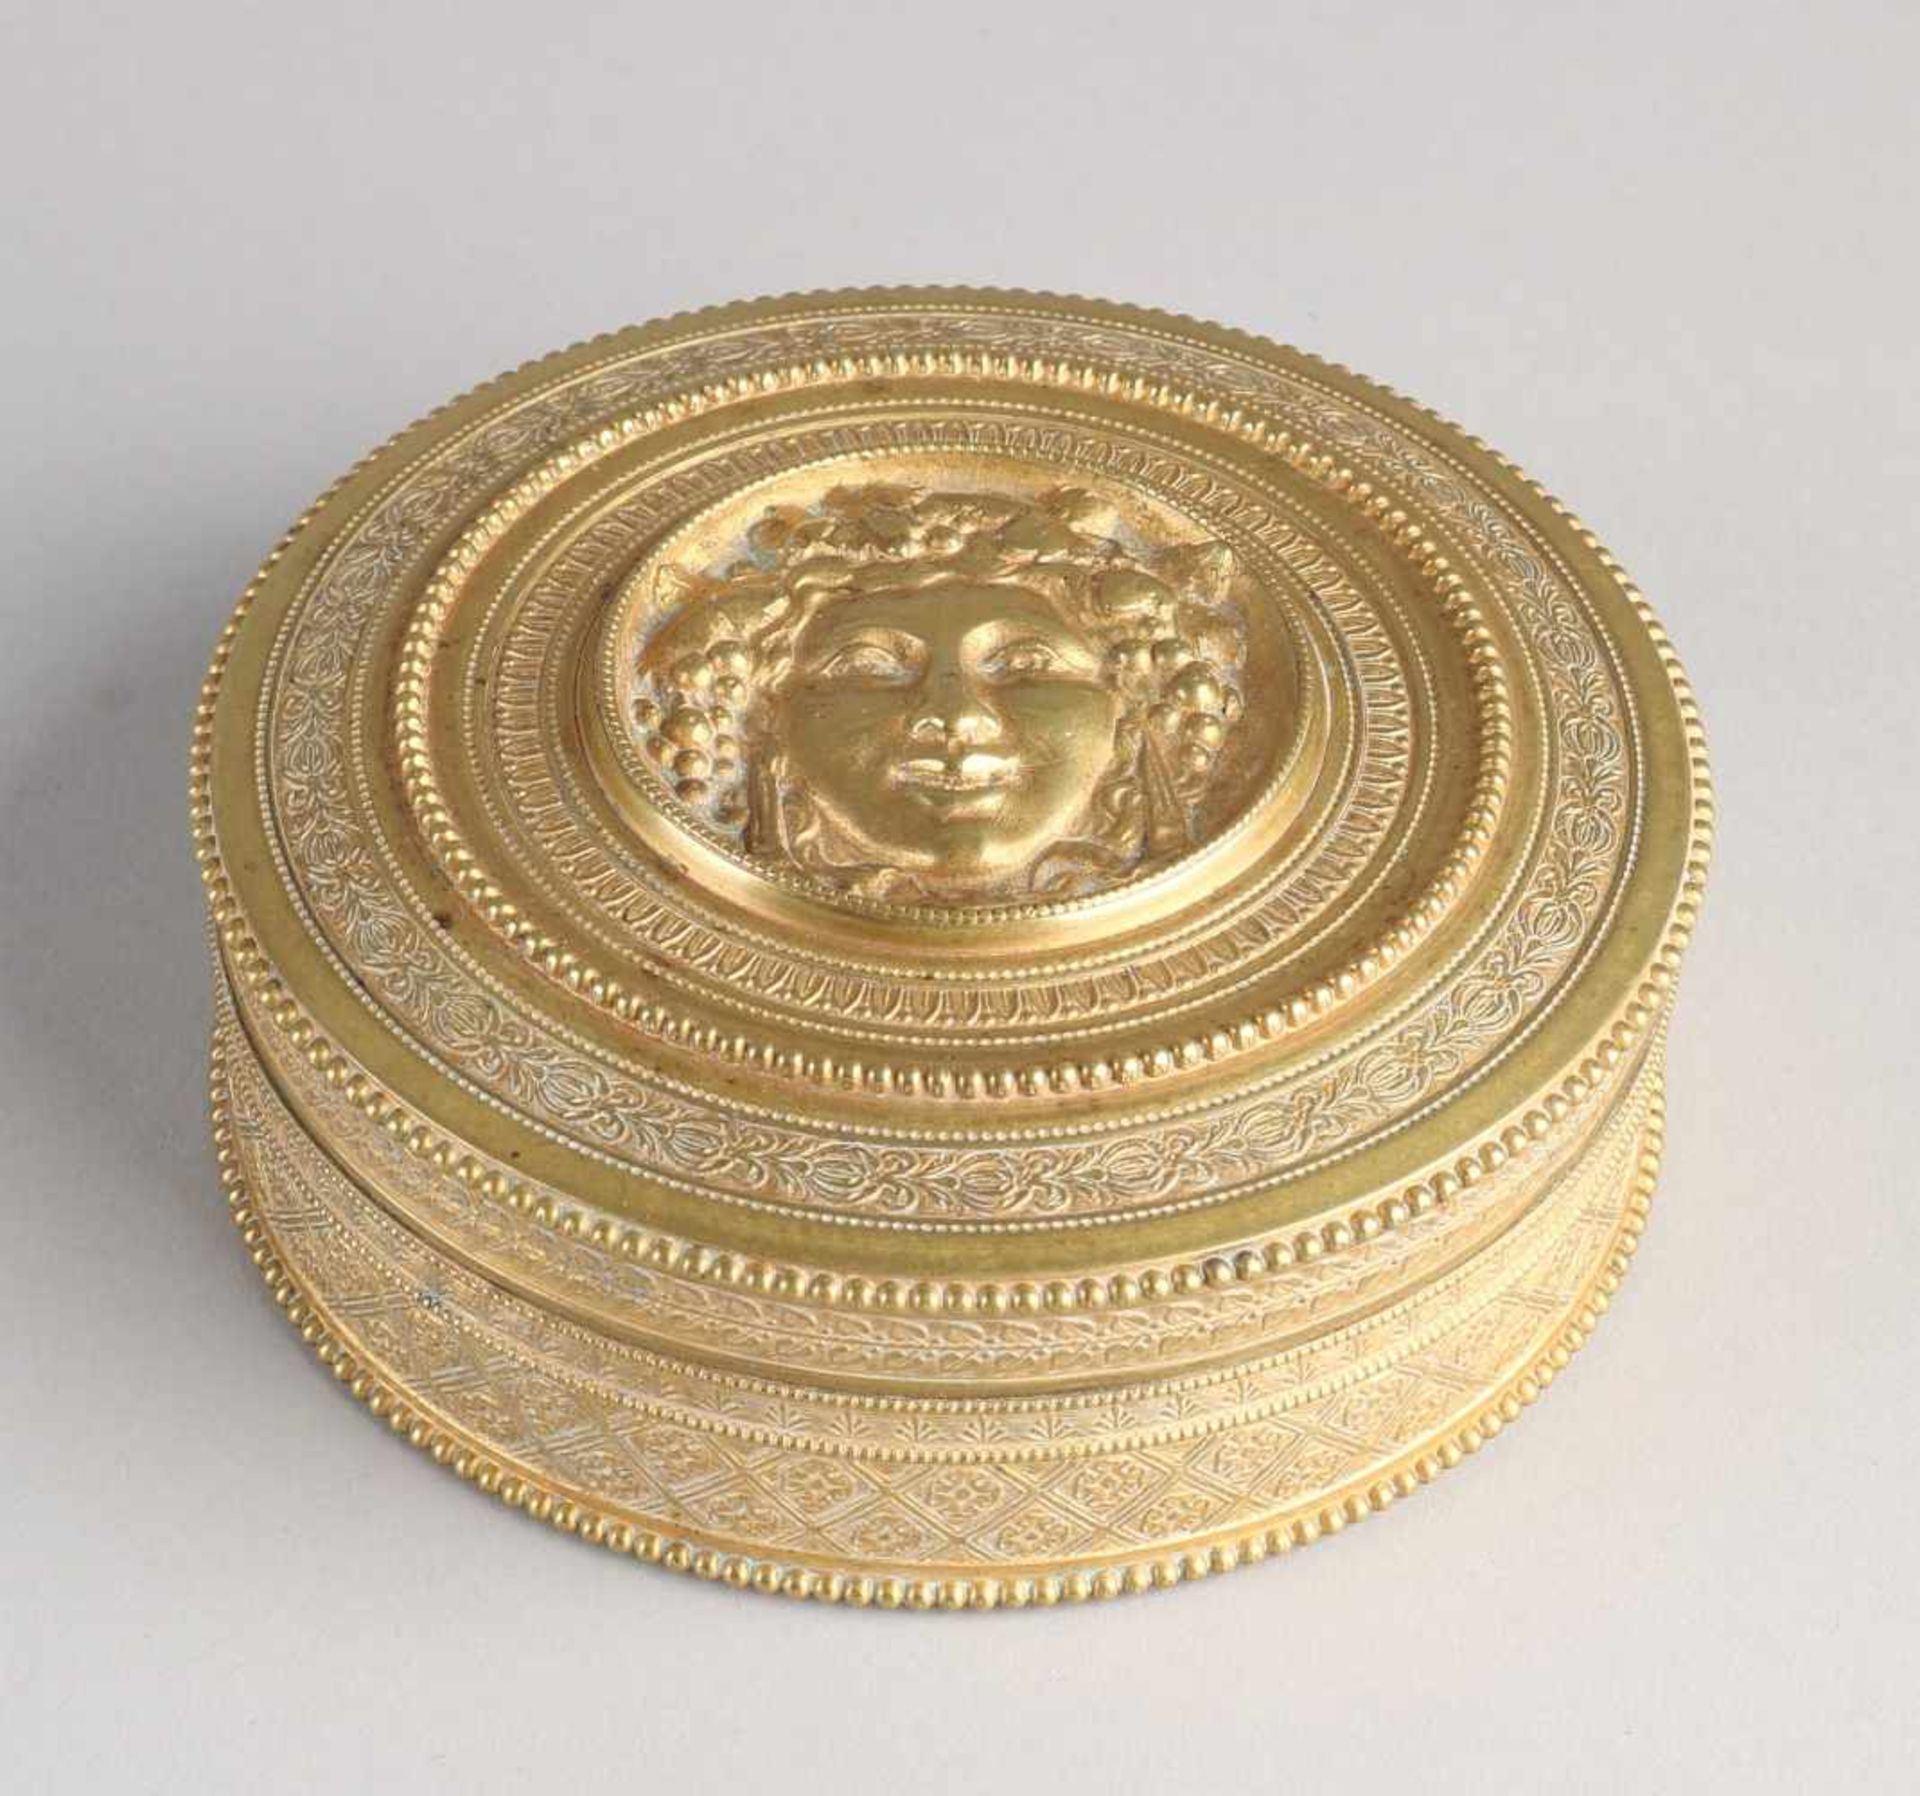 Heavy brass plated lid box. 19th century. Women medallion with bunches in her hair. Size: 4 x Ø 11,5